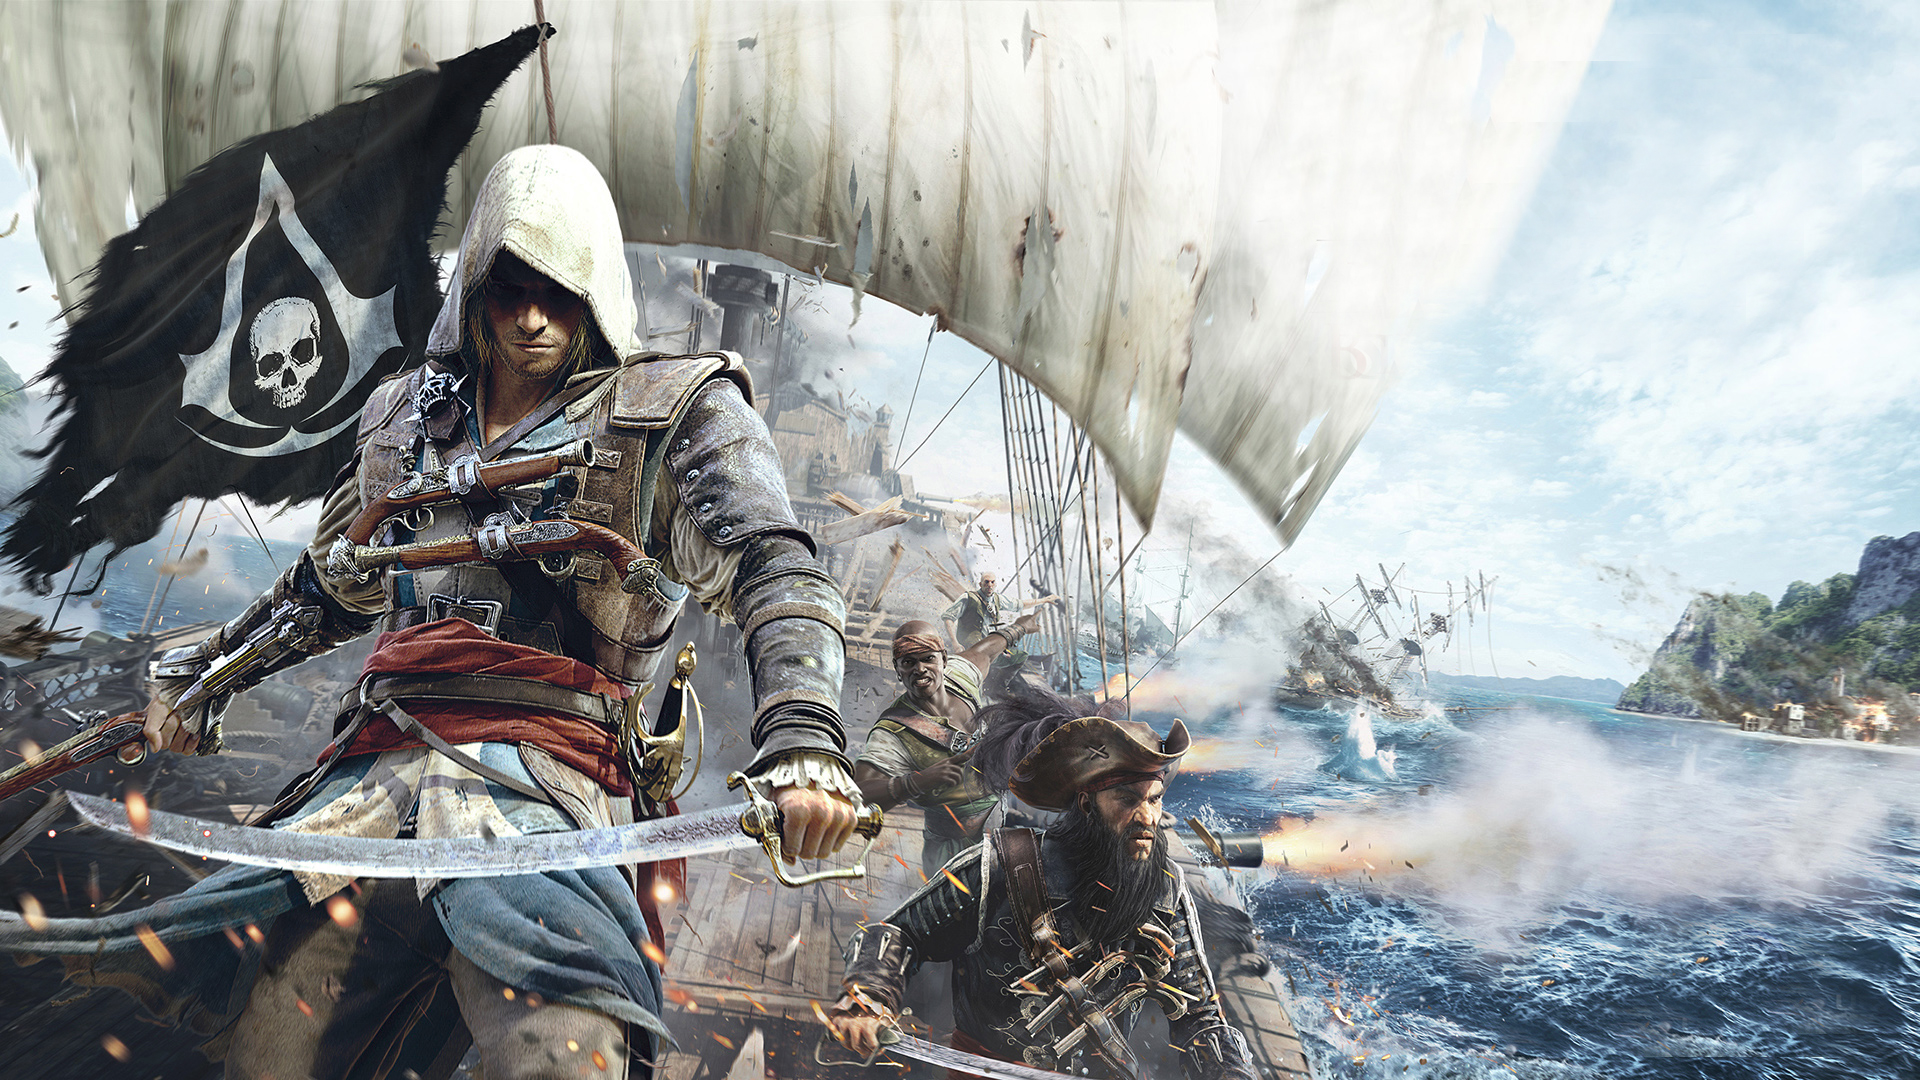 Download PC Wallpaper assassin's creed iv: black flag, assassin's creed, video game